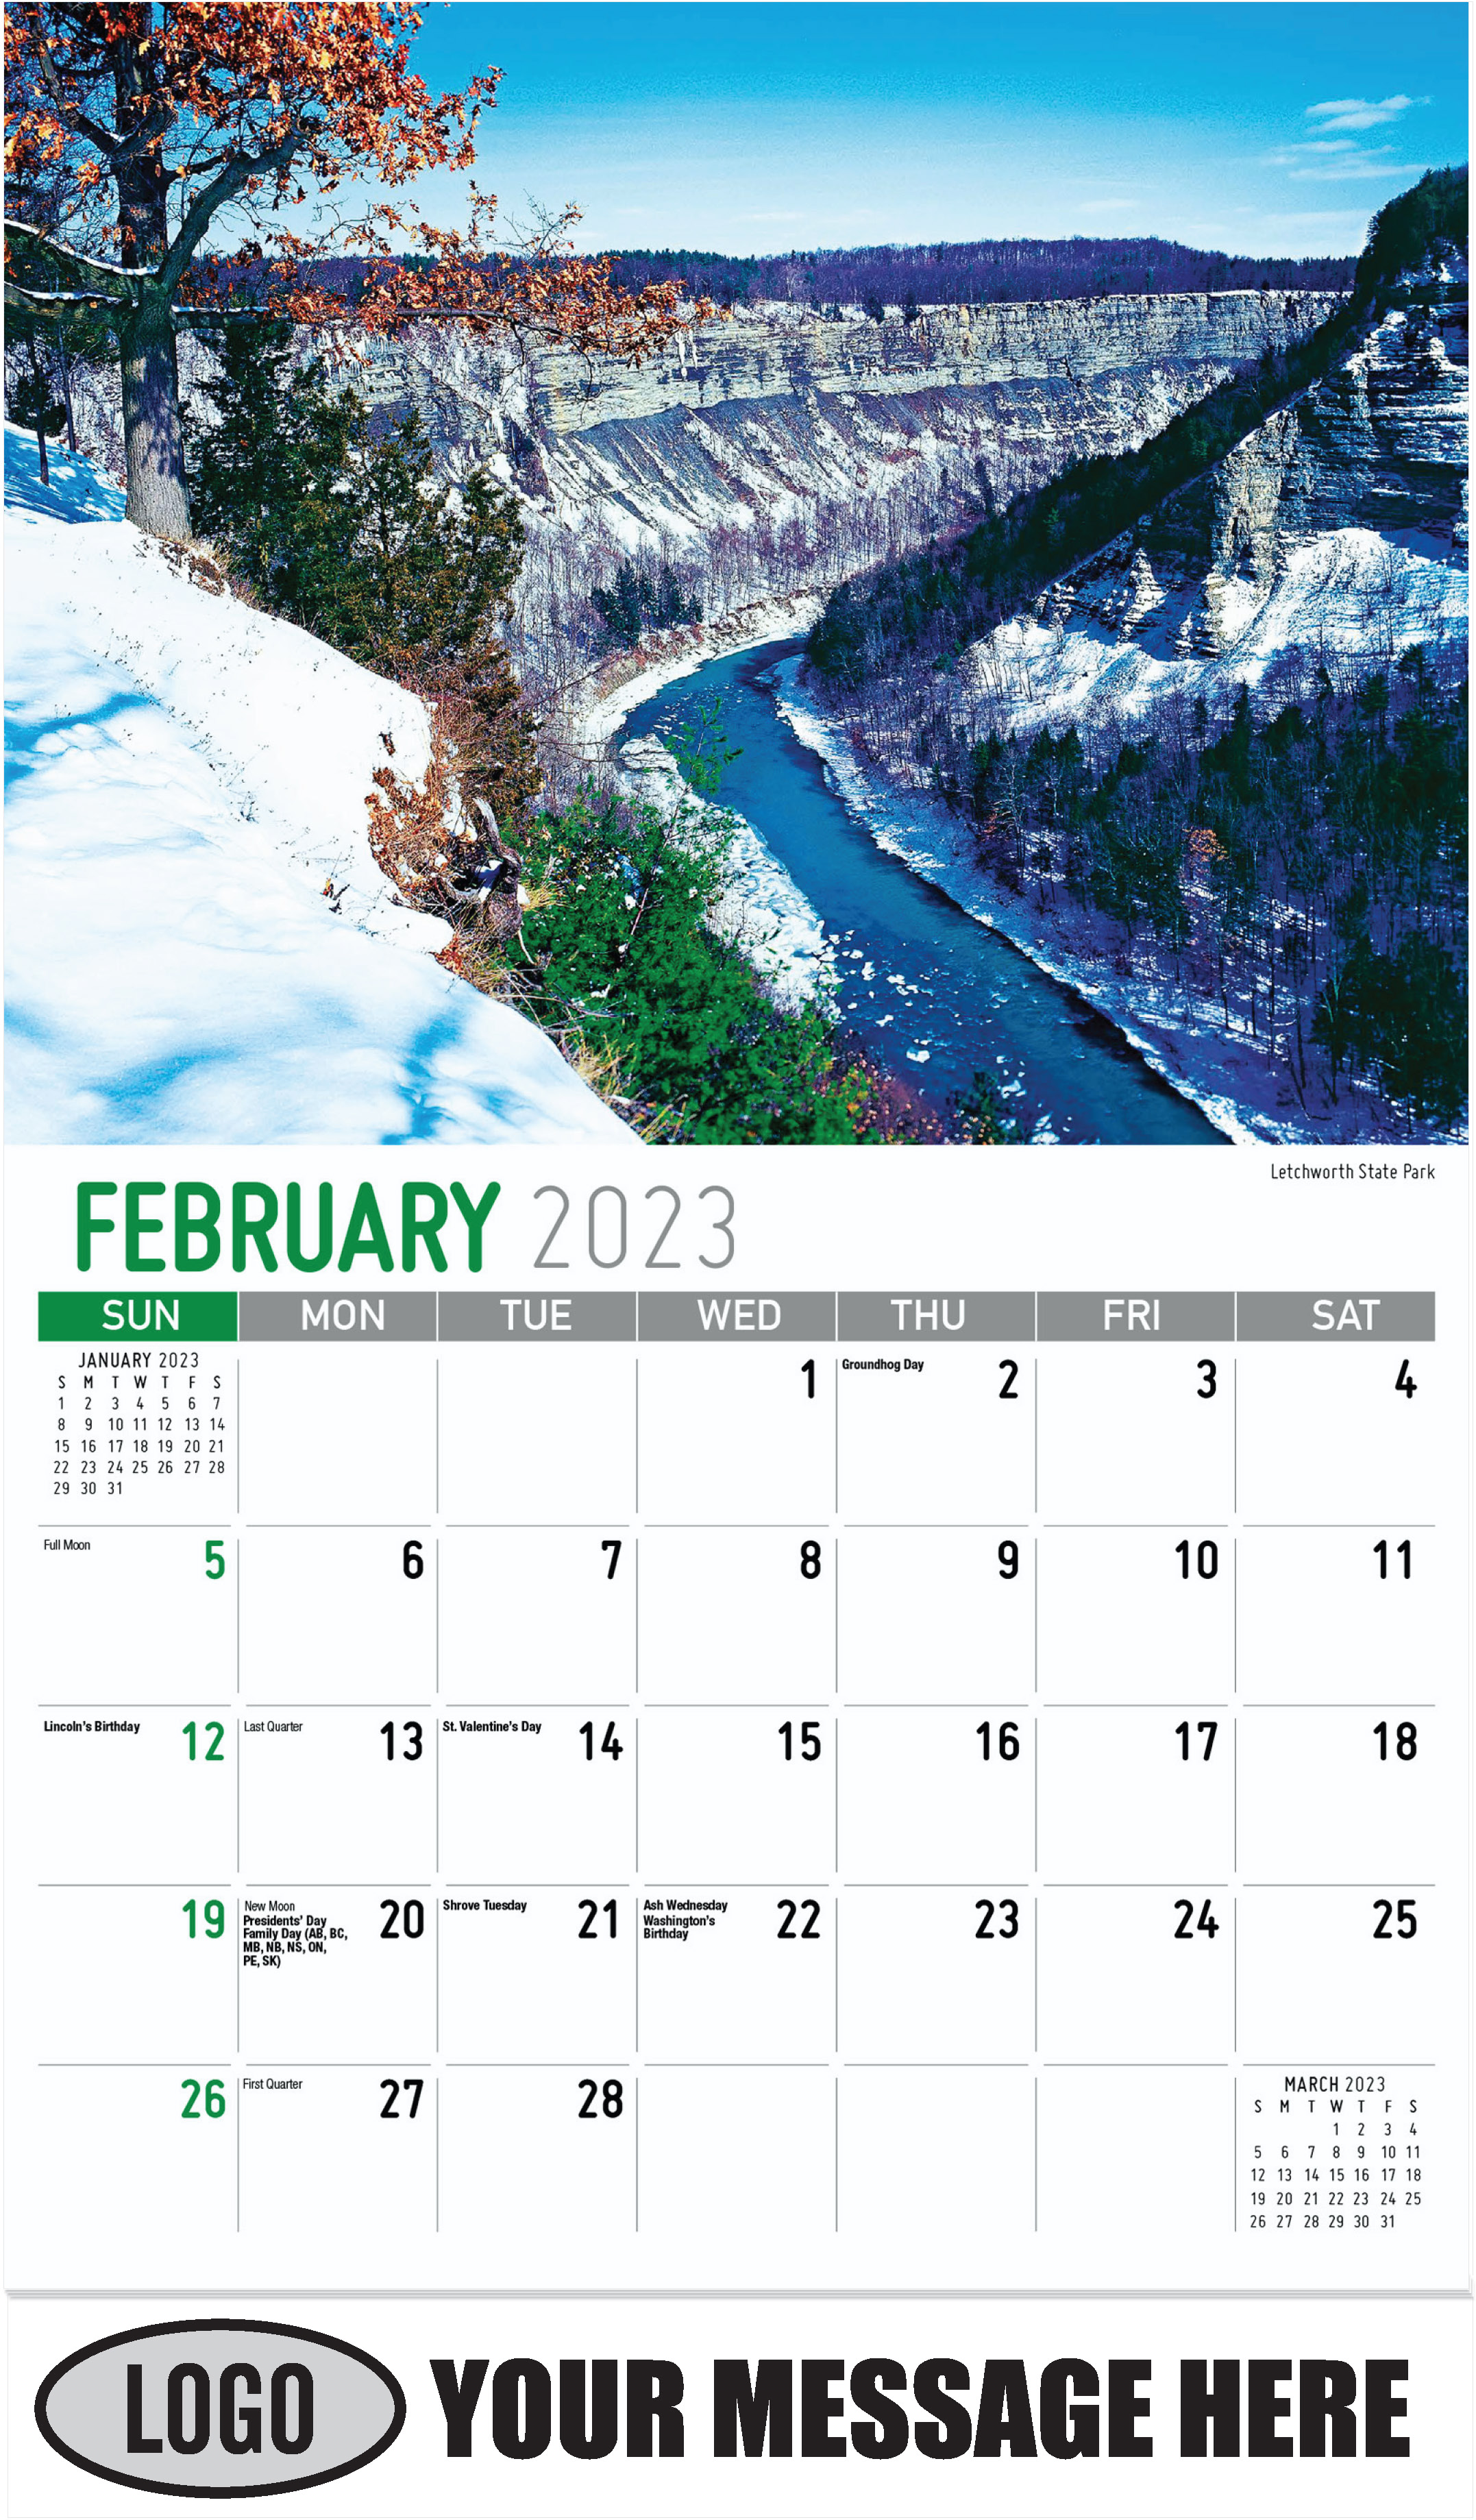 Letchworth State Park - February - Scenes of New York 2023 Promotional Calendar